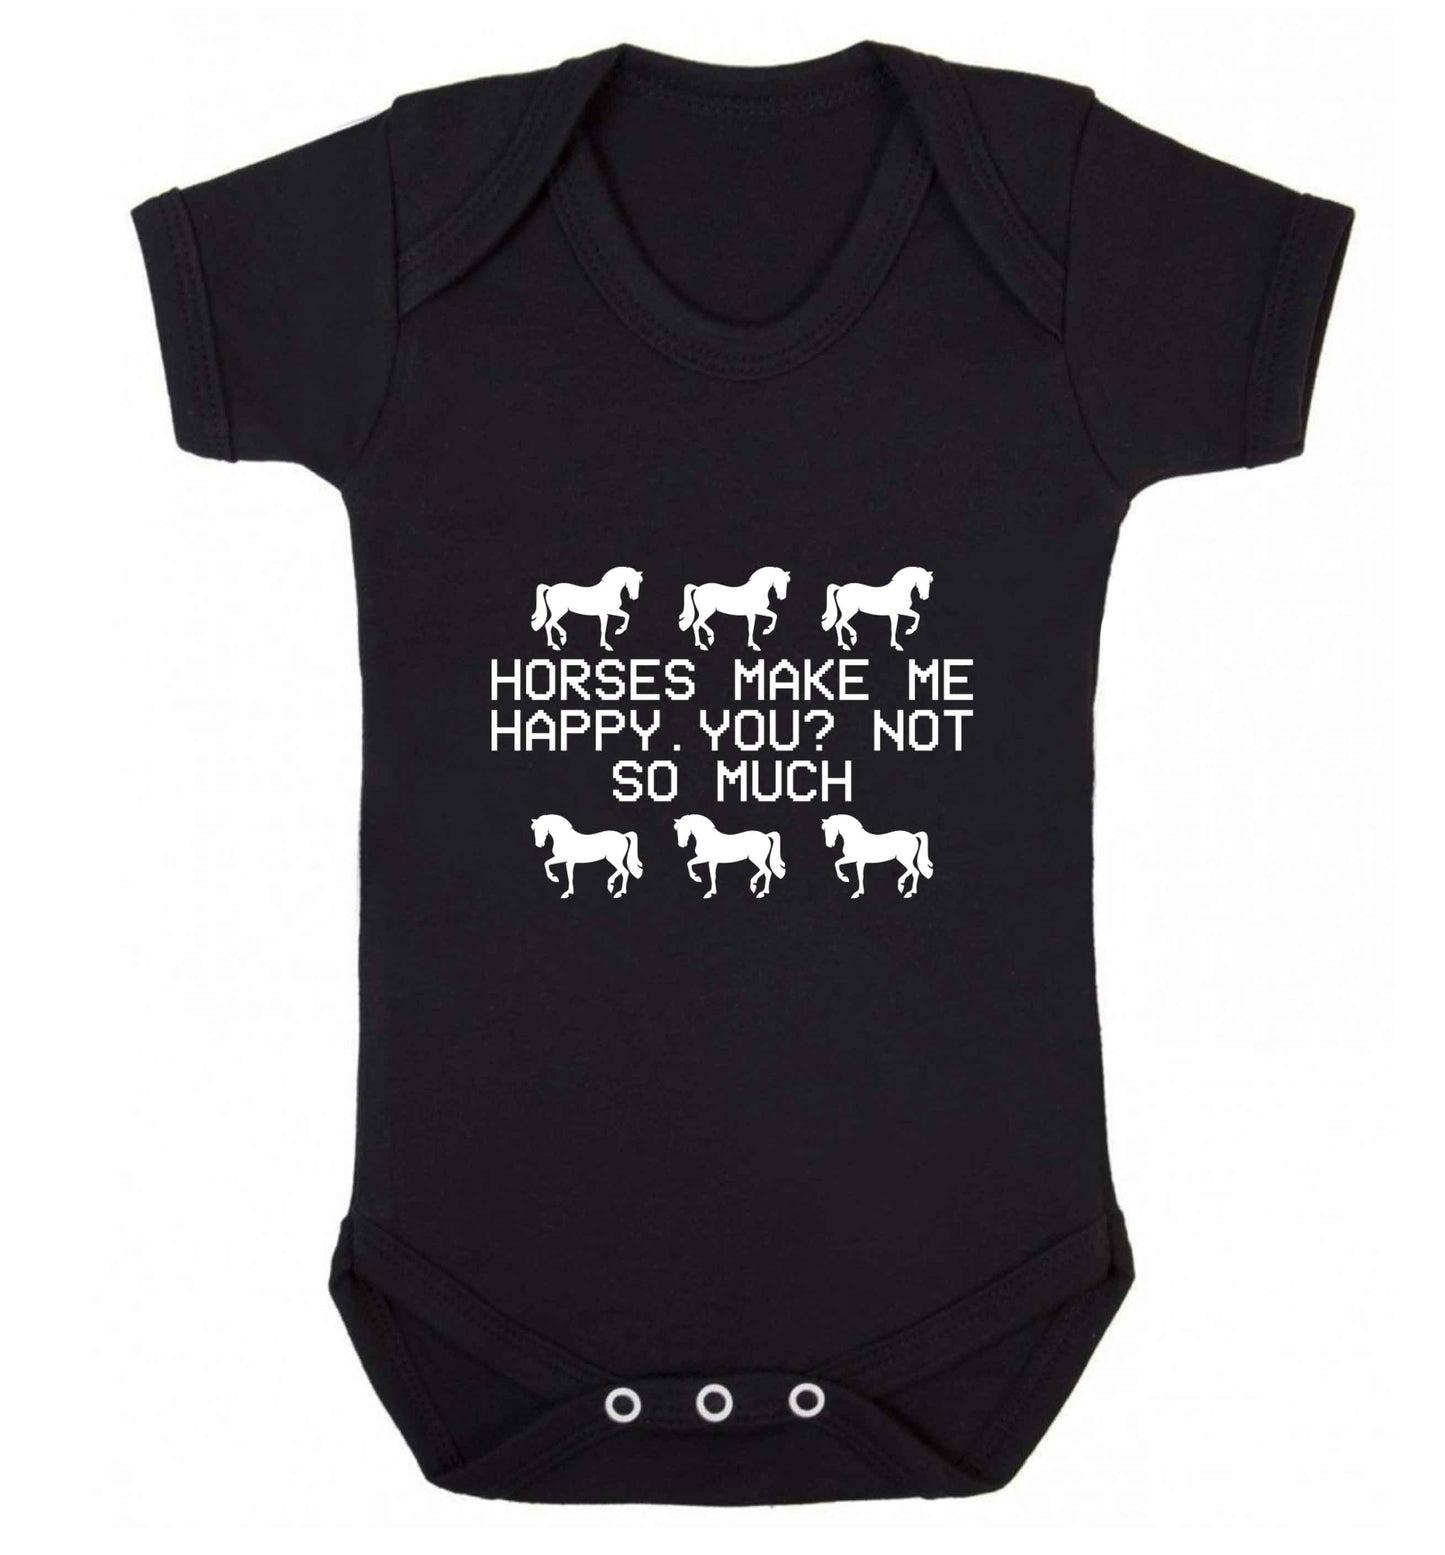 Horses make me happy, you not so much baby vest black 18-24 months